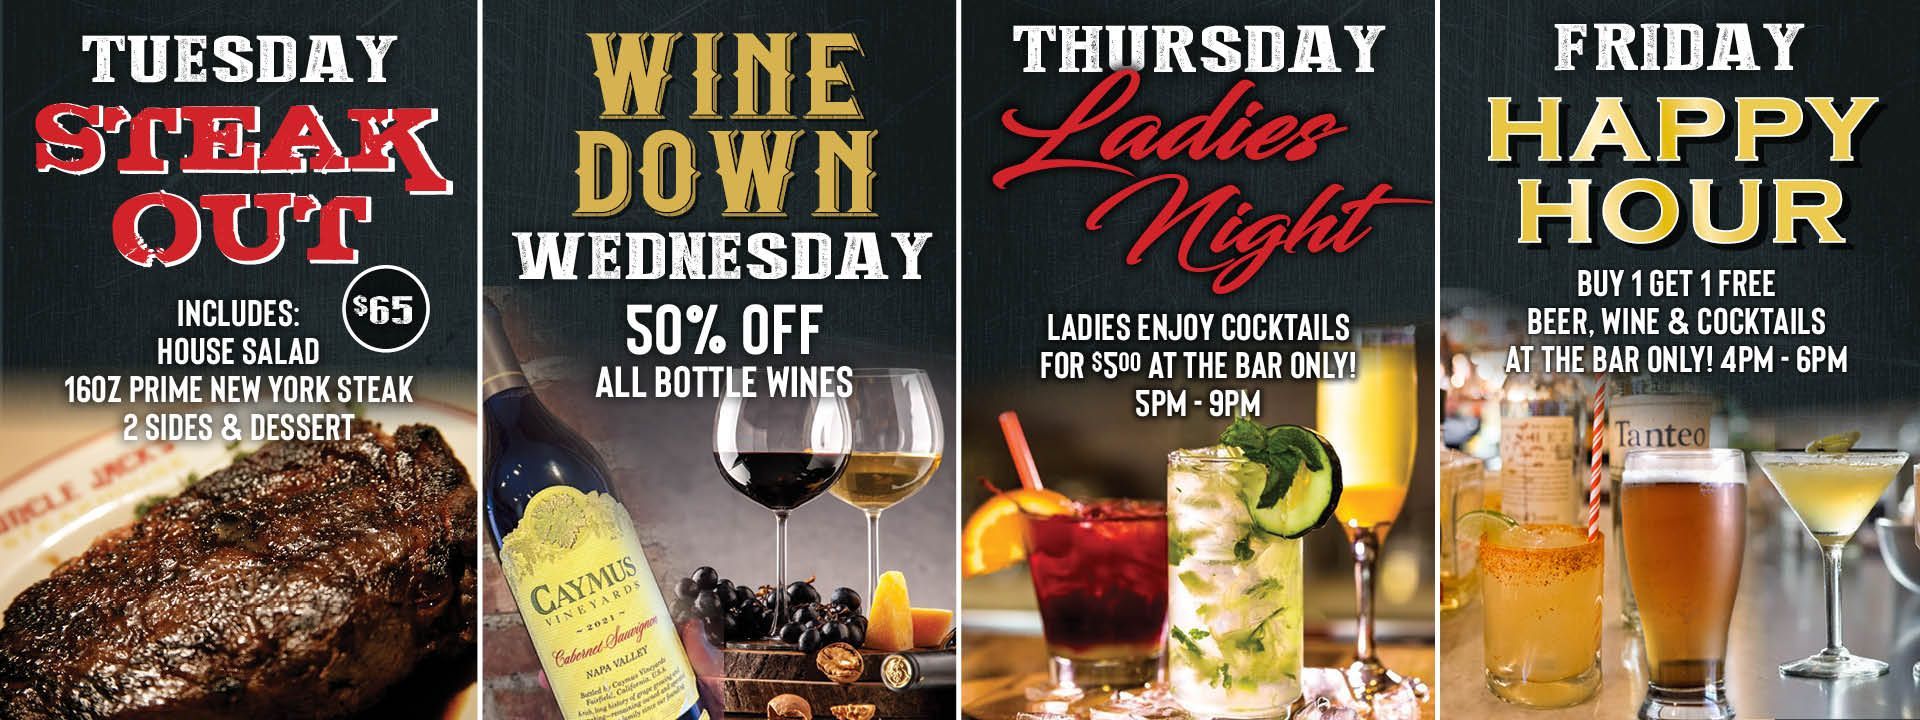 a poster for tuesday steak out wine down wednesday thursday ladies night and friday happy hour